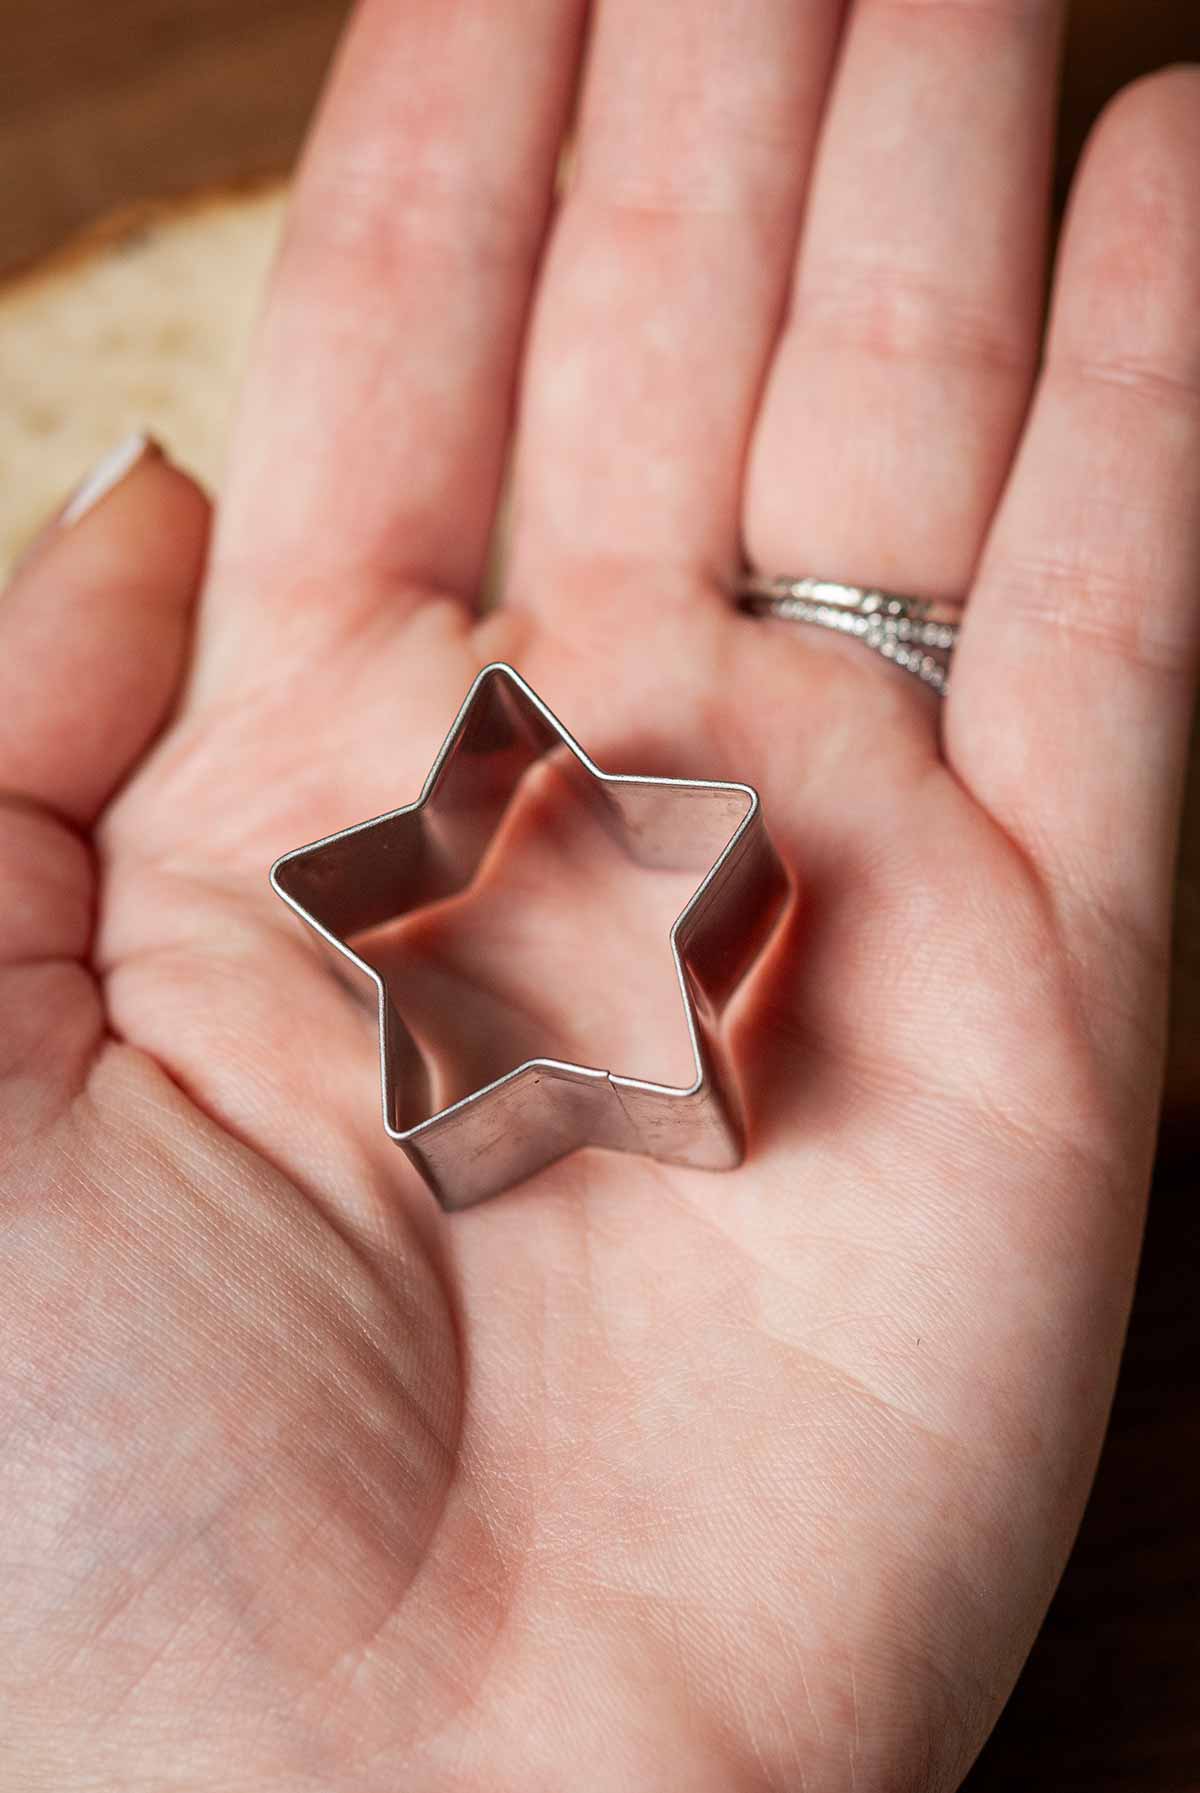 A hand holding a star-shaped cookie cutter.